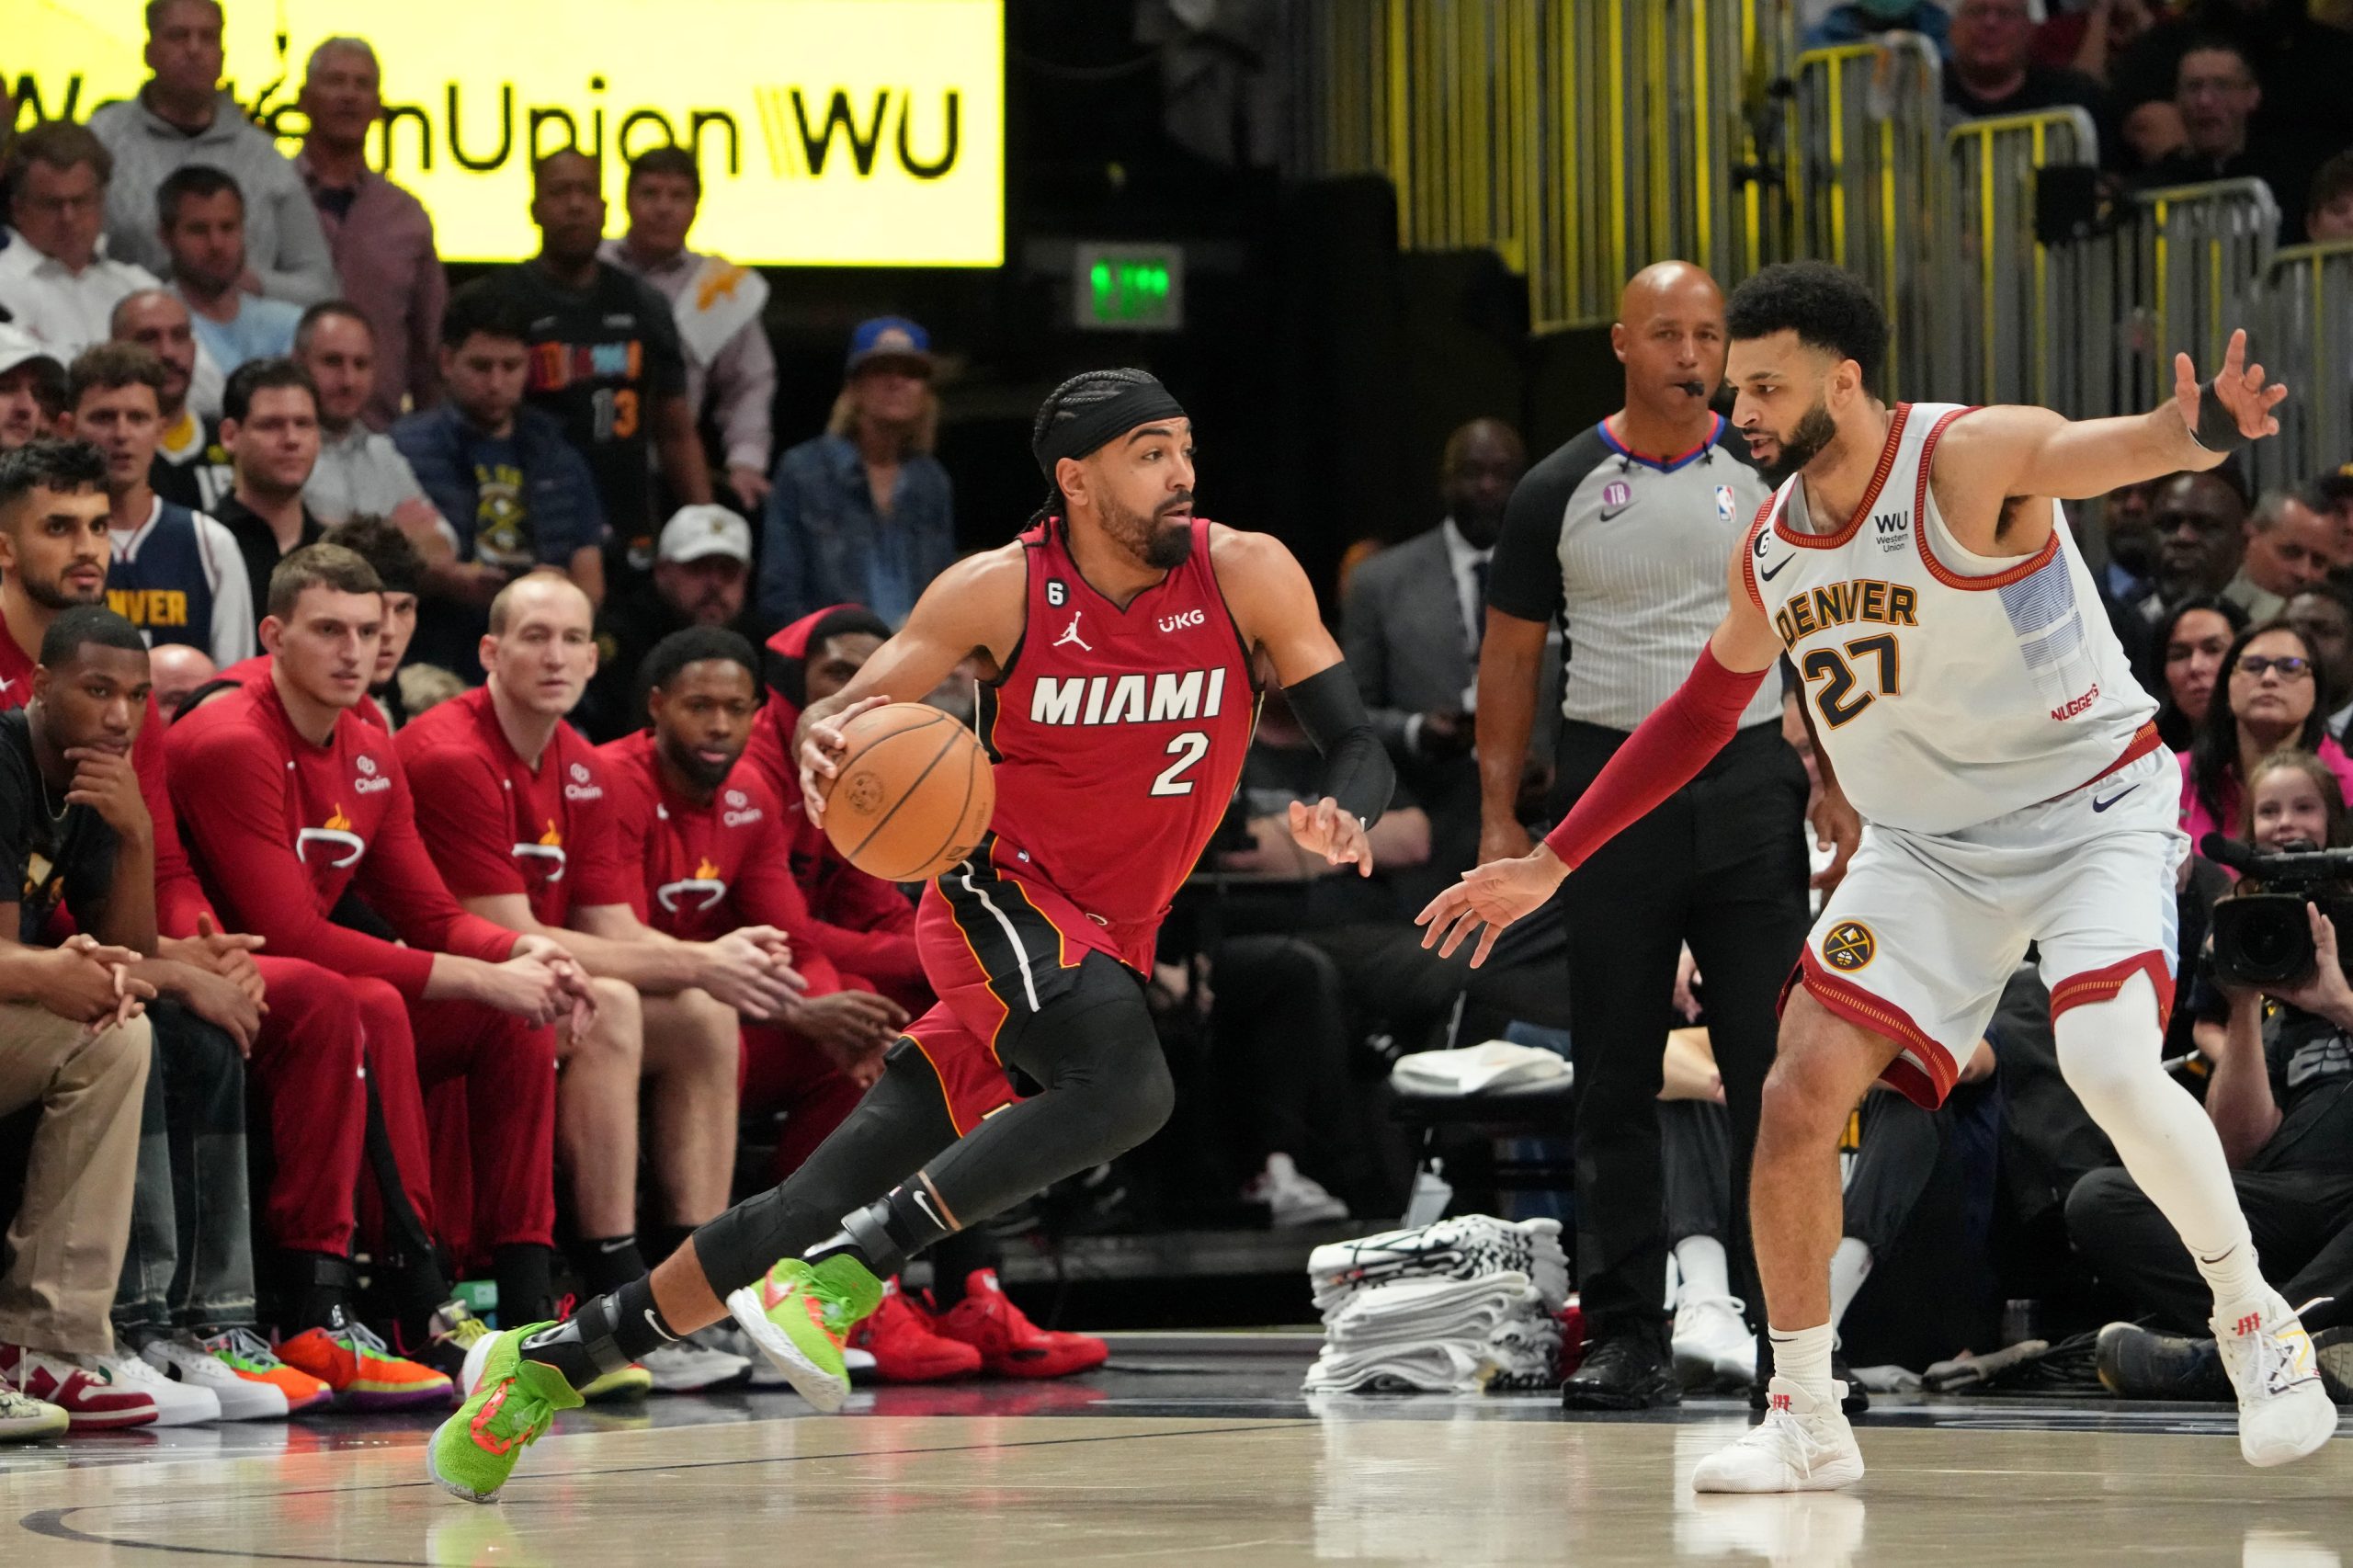 Jun 12, 2023; Denver, Colorado, USA; Miami Heat guard Gabe Vincent (2) dribbles the ball against Denver Nuggets guard Jamal Murray (27) during the first quarter in game five of the 2023 NBA Finals at Ball Arena. Mandatory Credit: Kyle Terada-USA TODAY Sports